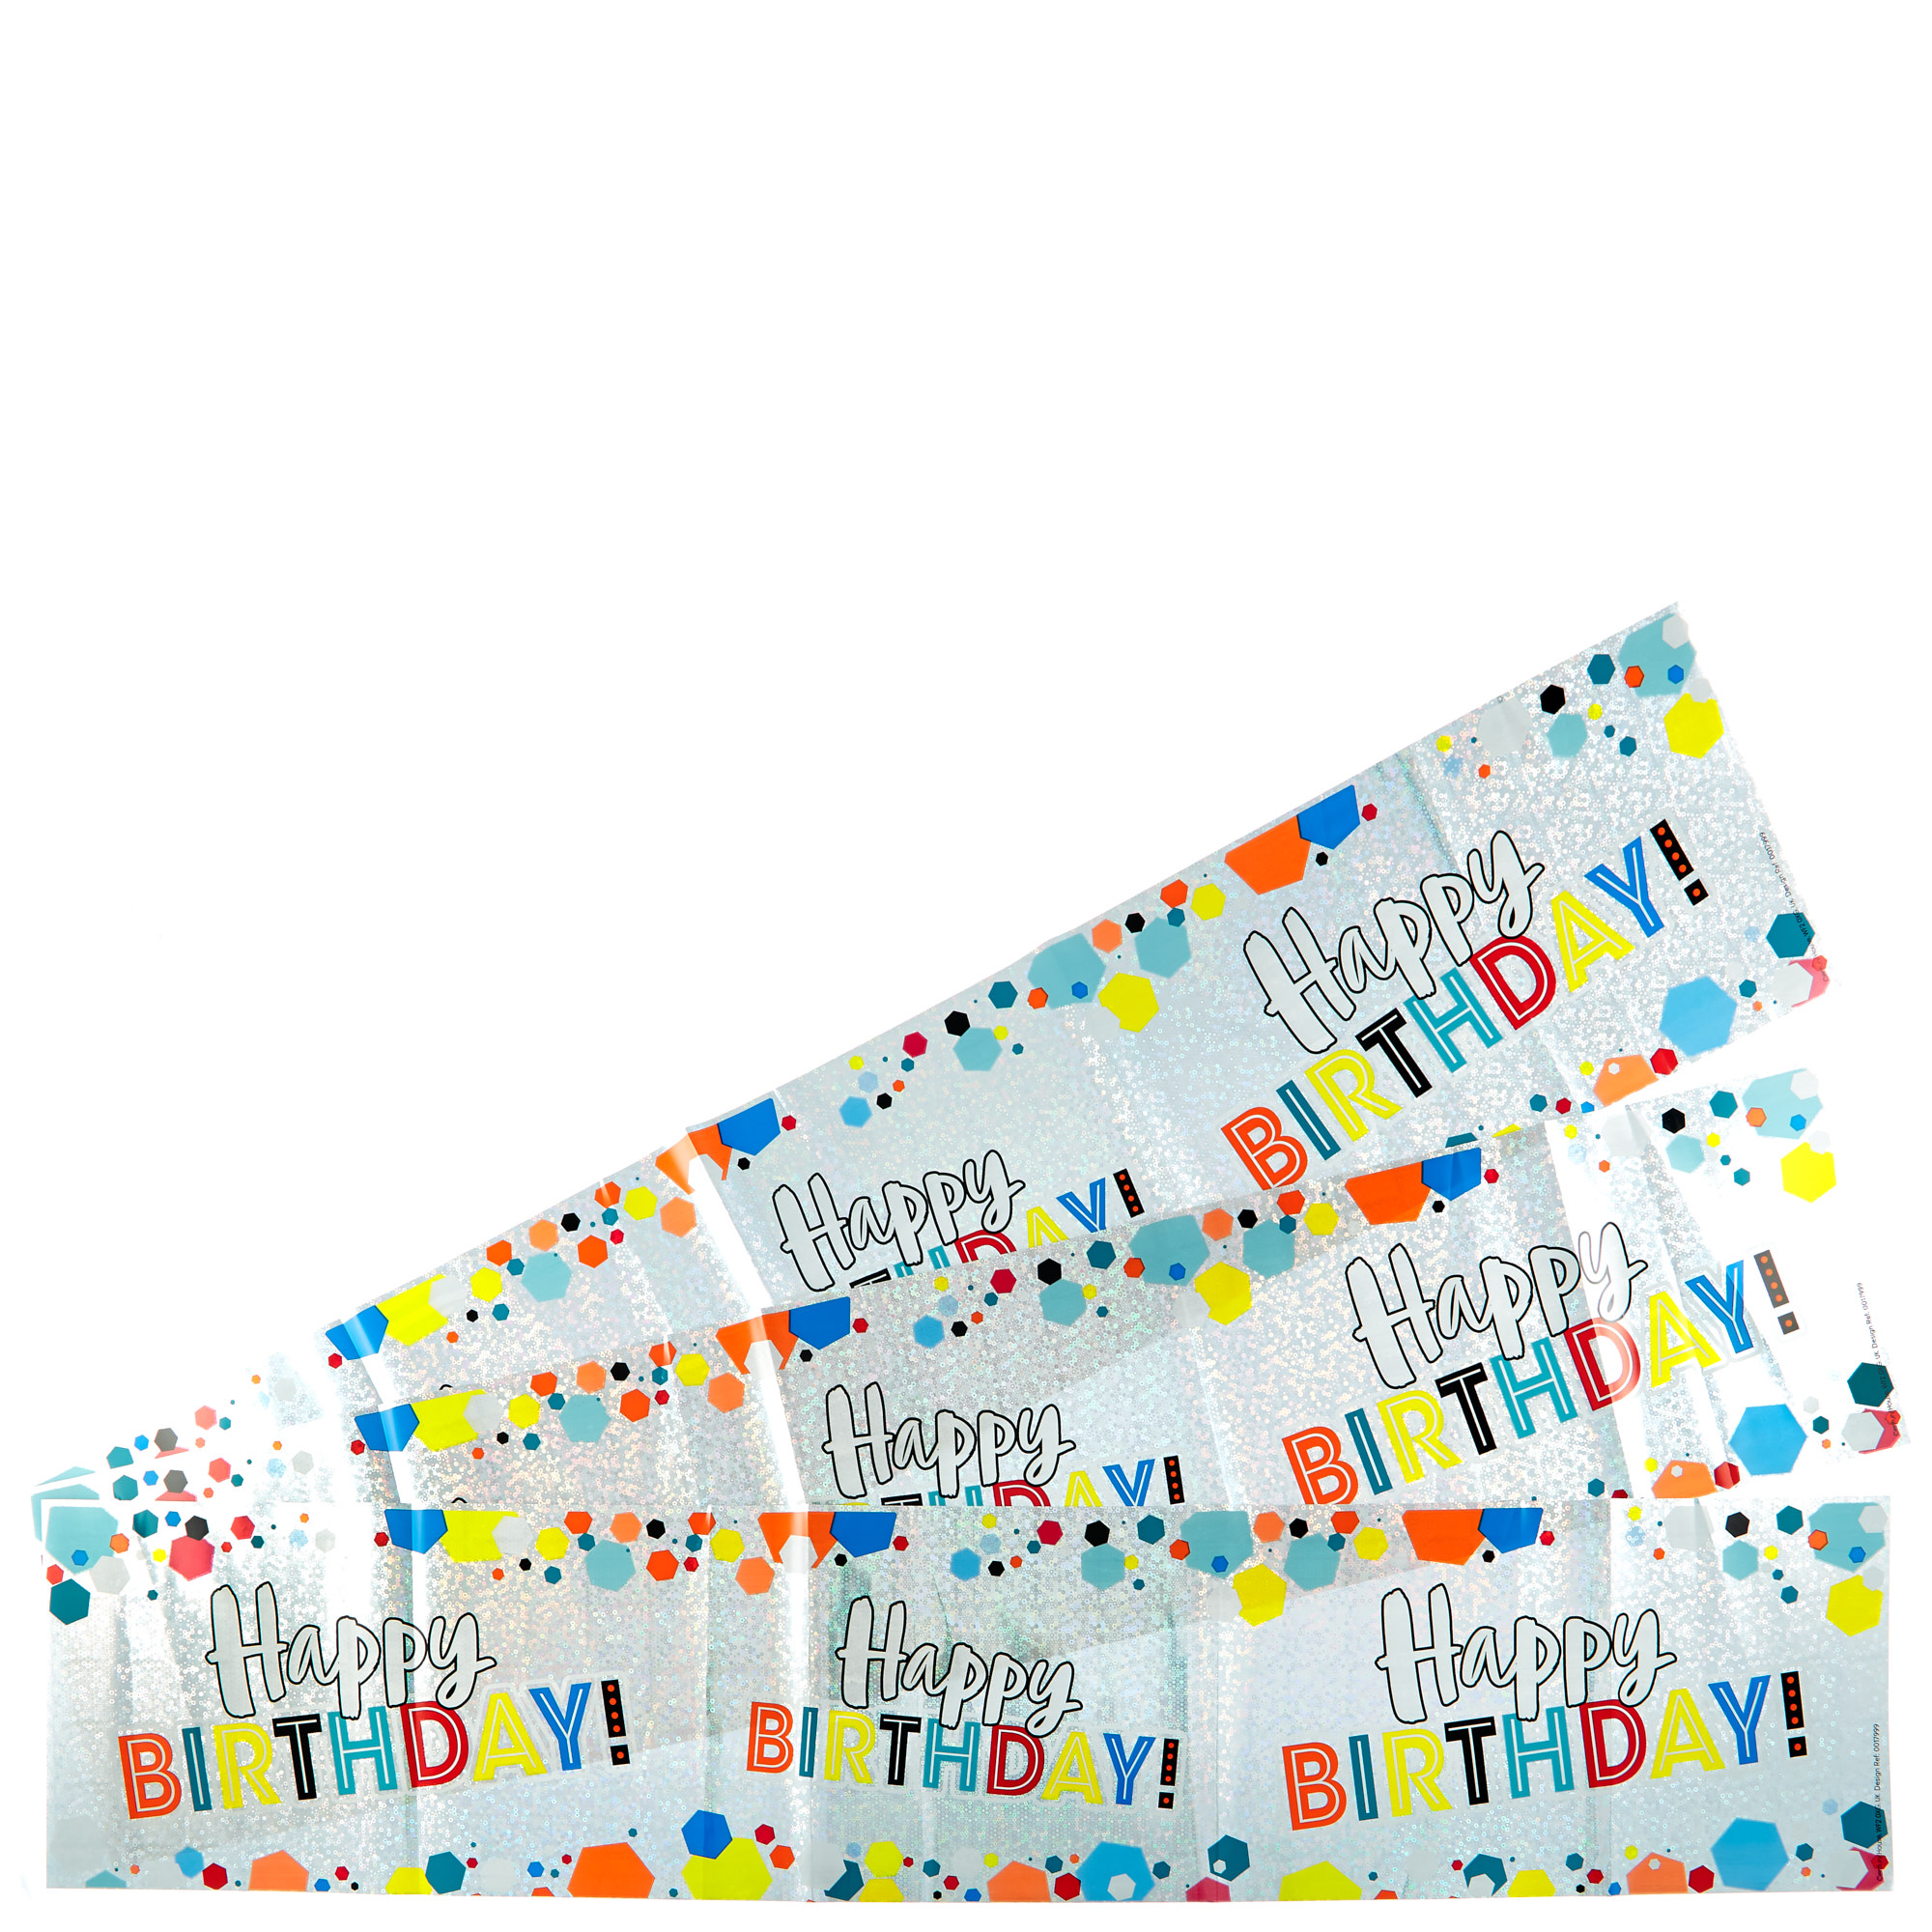 Holographic Happy Birthday Party Banners - Pack Of 3